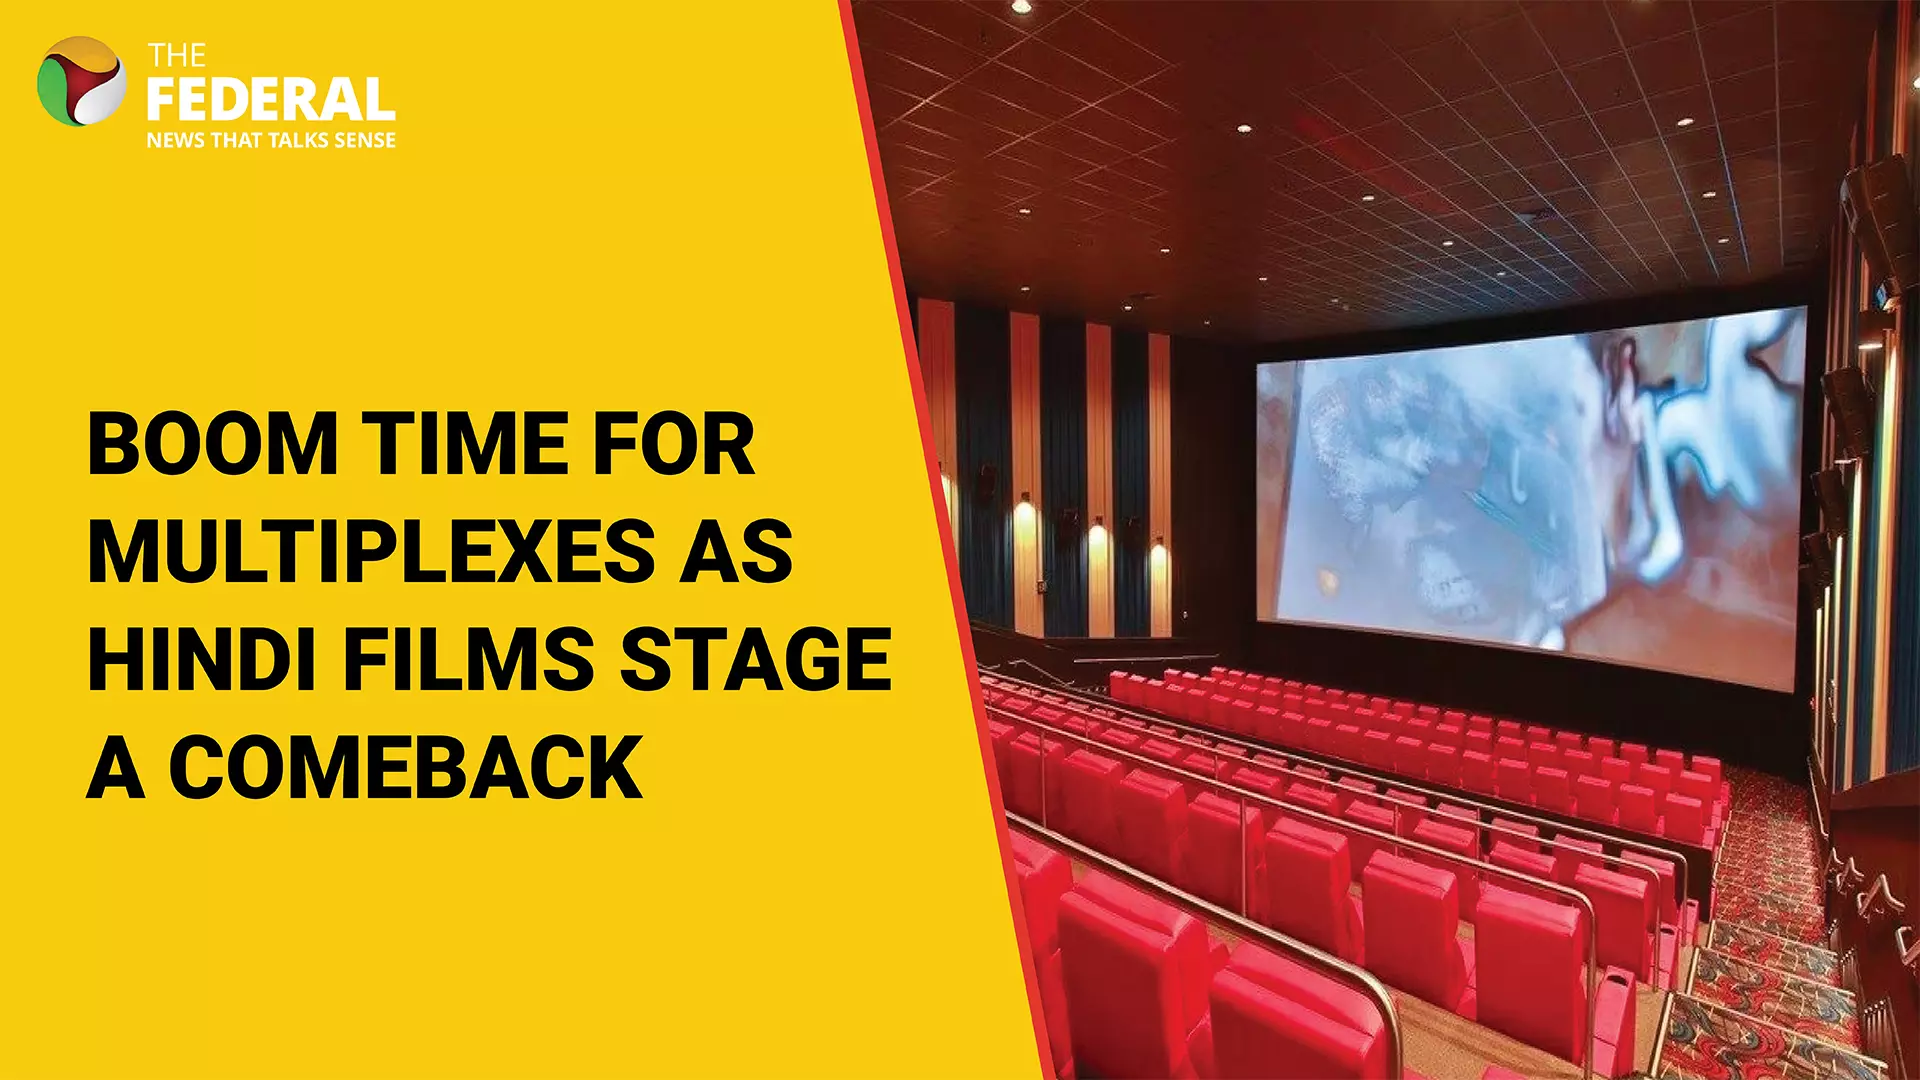 Boom time for multiplexes as Hindi films stage a comeback: Report